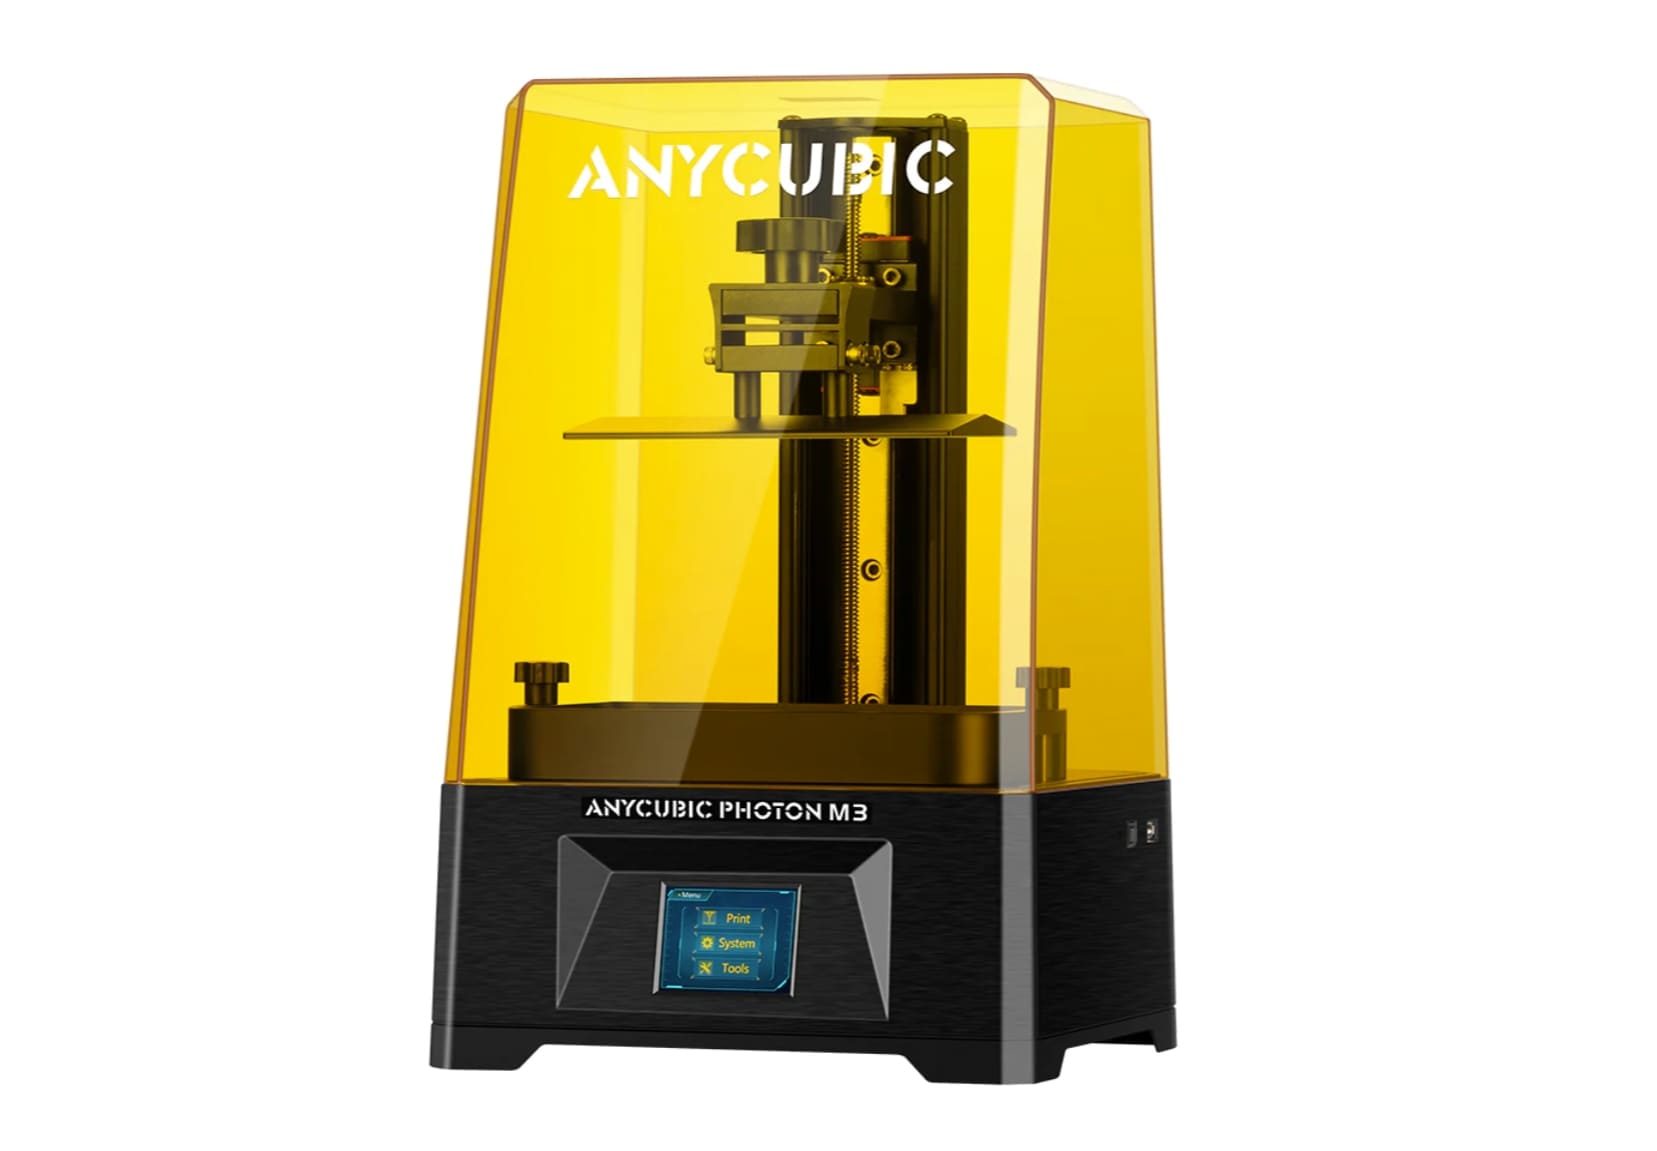 Anycubic Photon M3-Credit from Anycubic